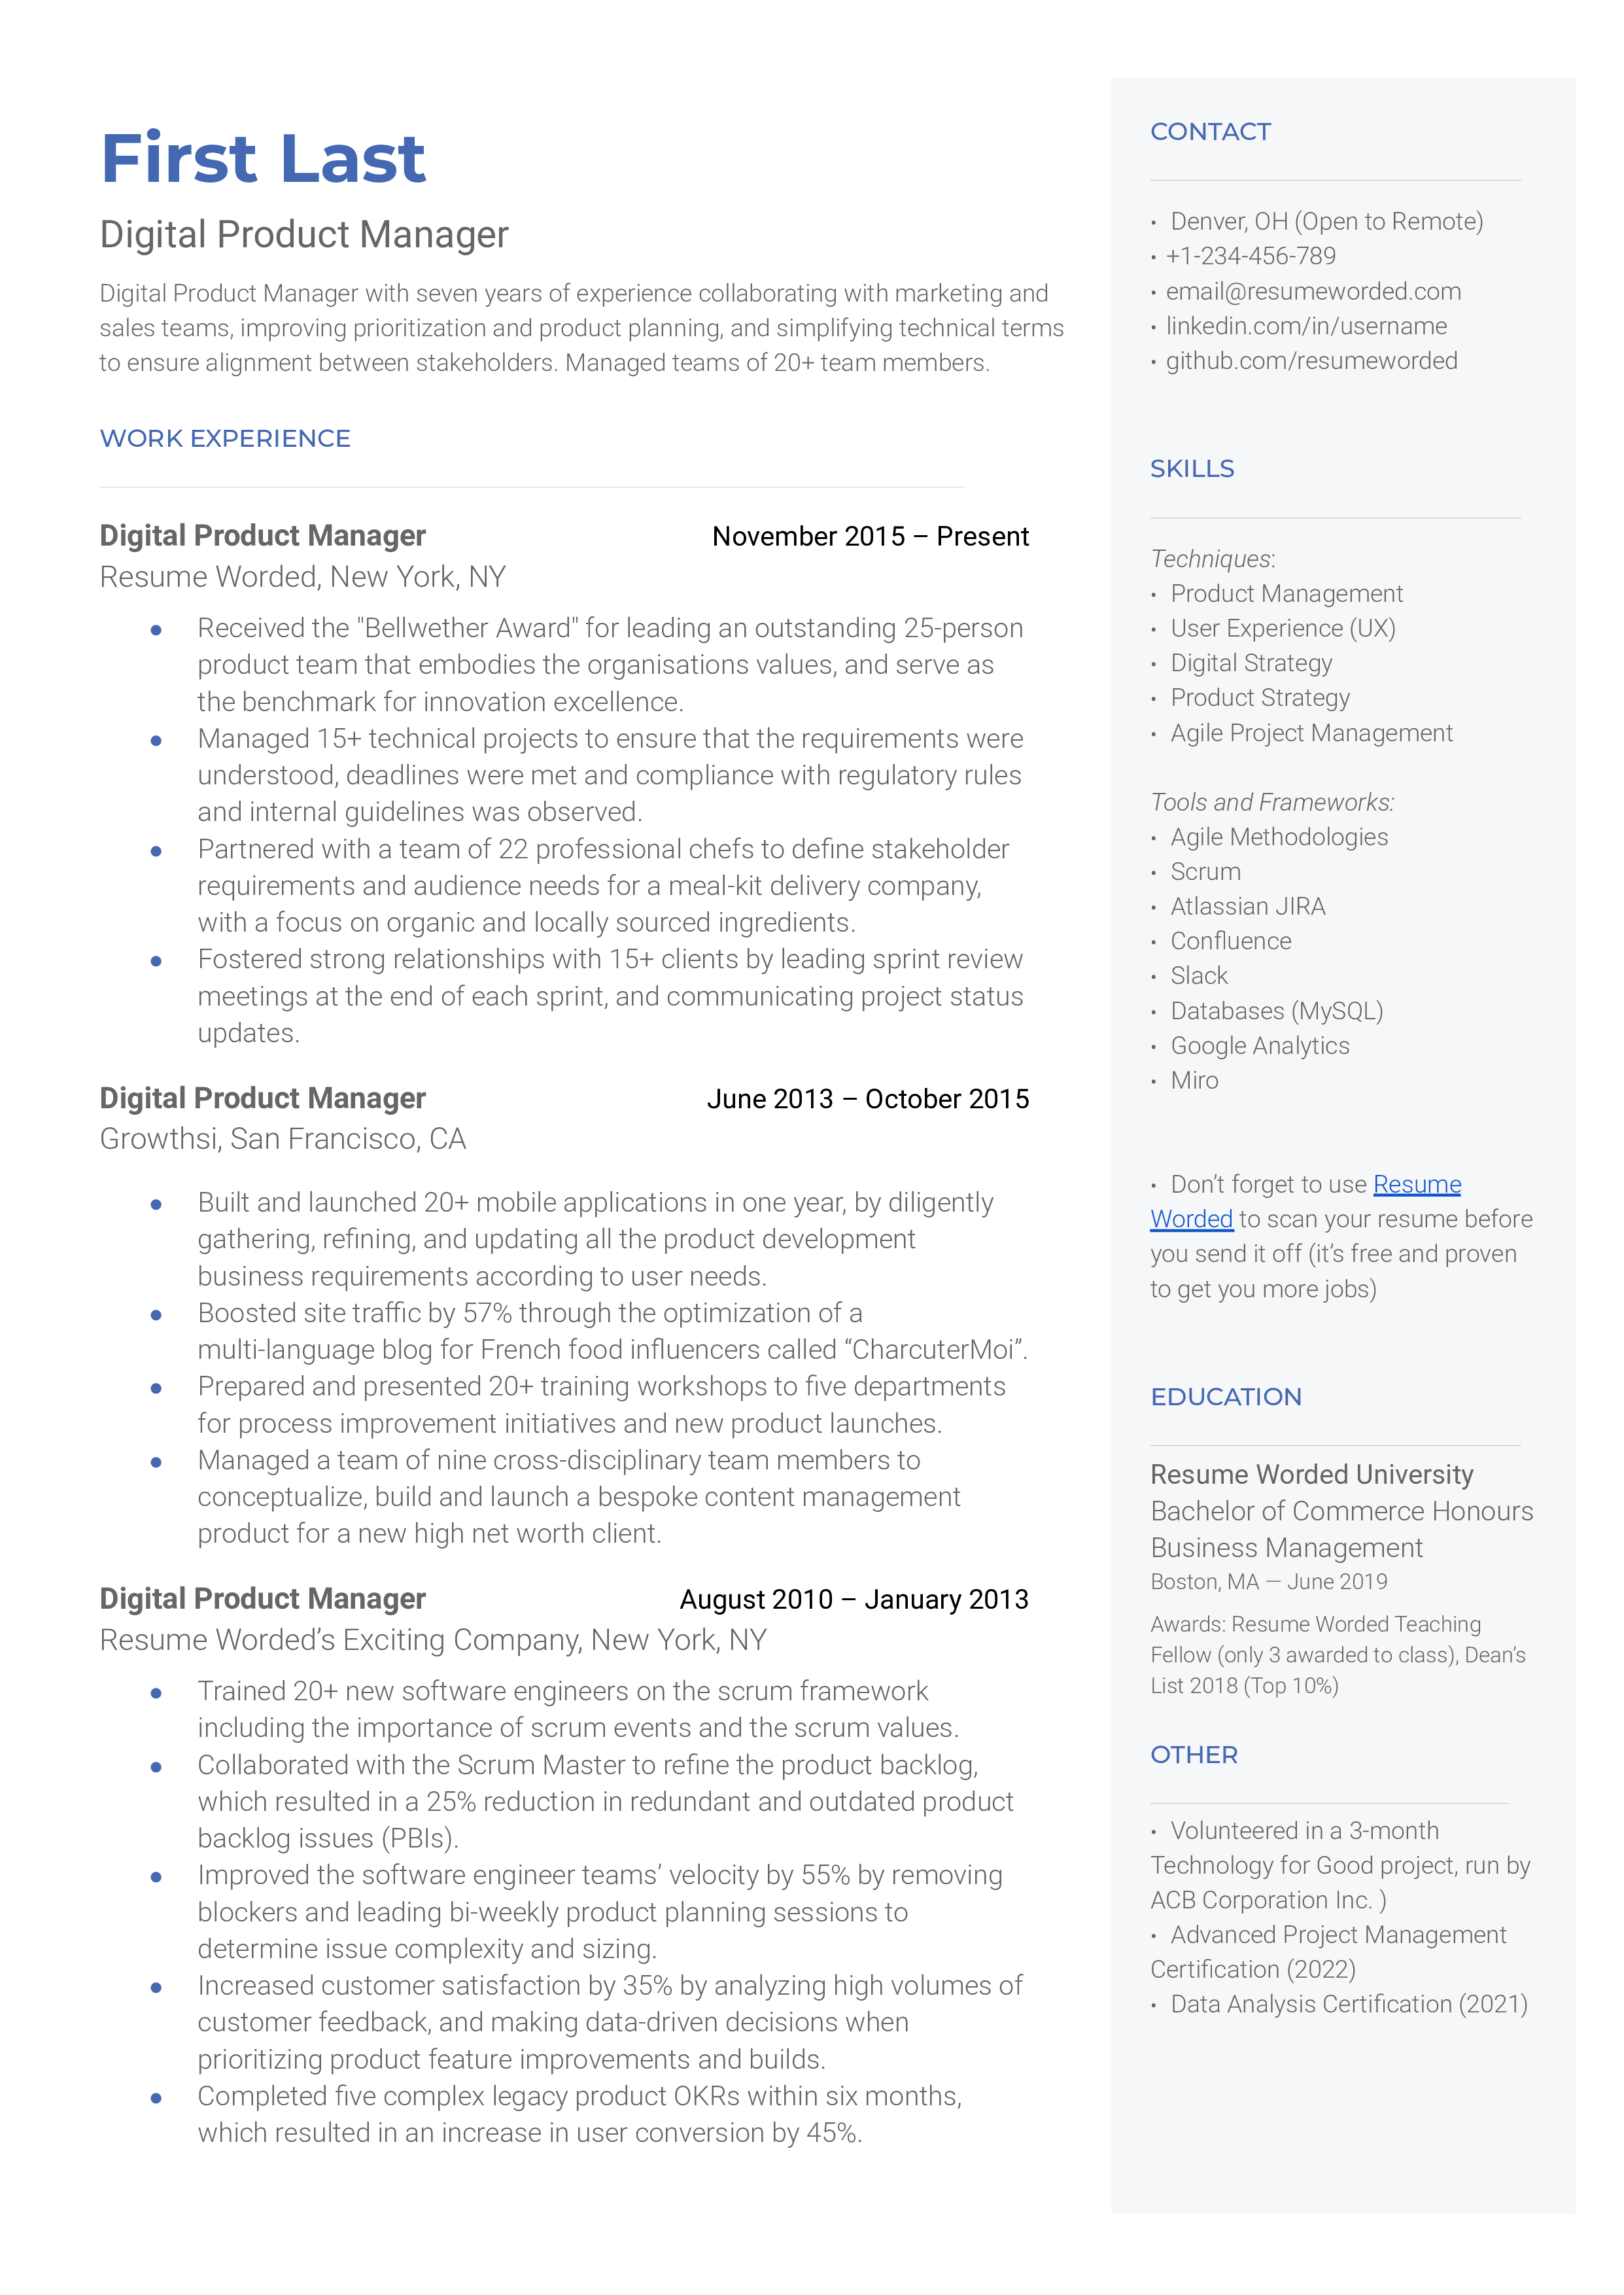 Snapshot of a CV highlighting UX design skills and adaptability in a digital product manager role.